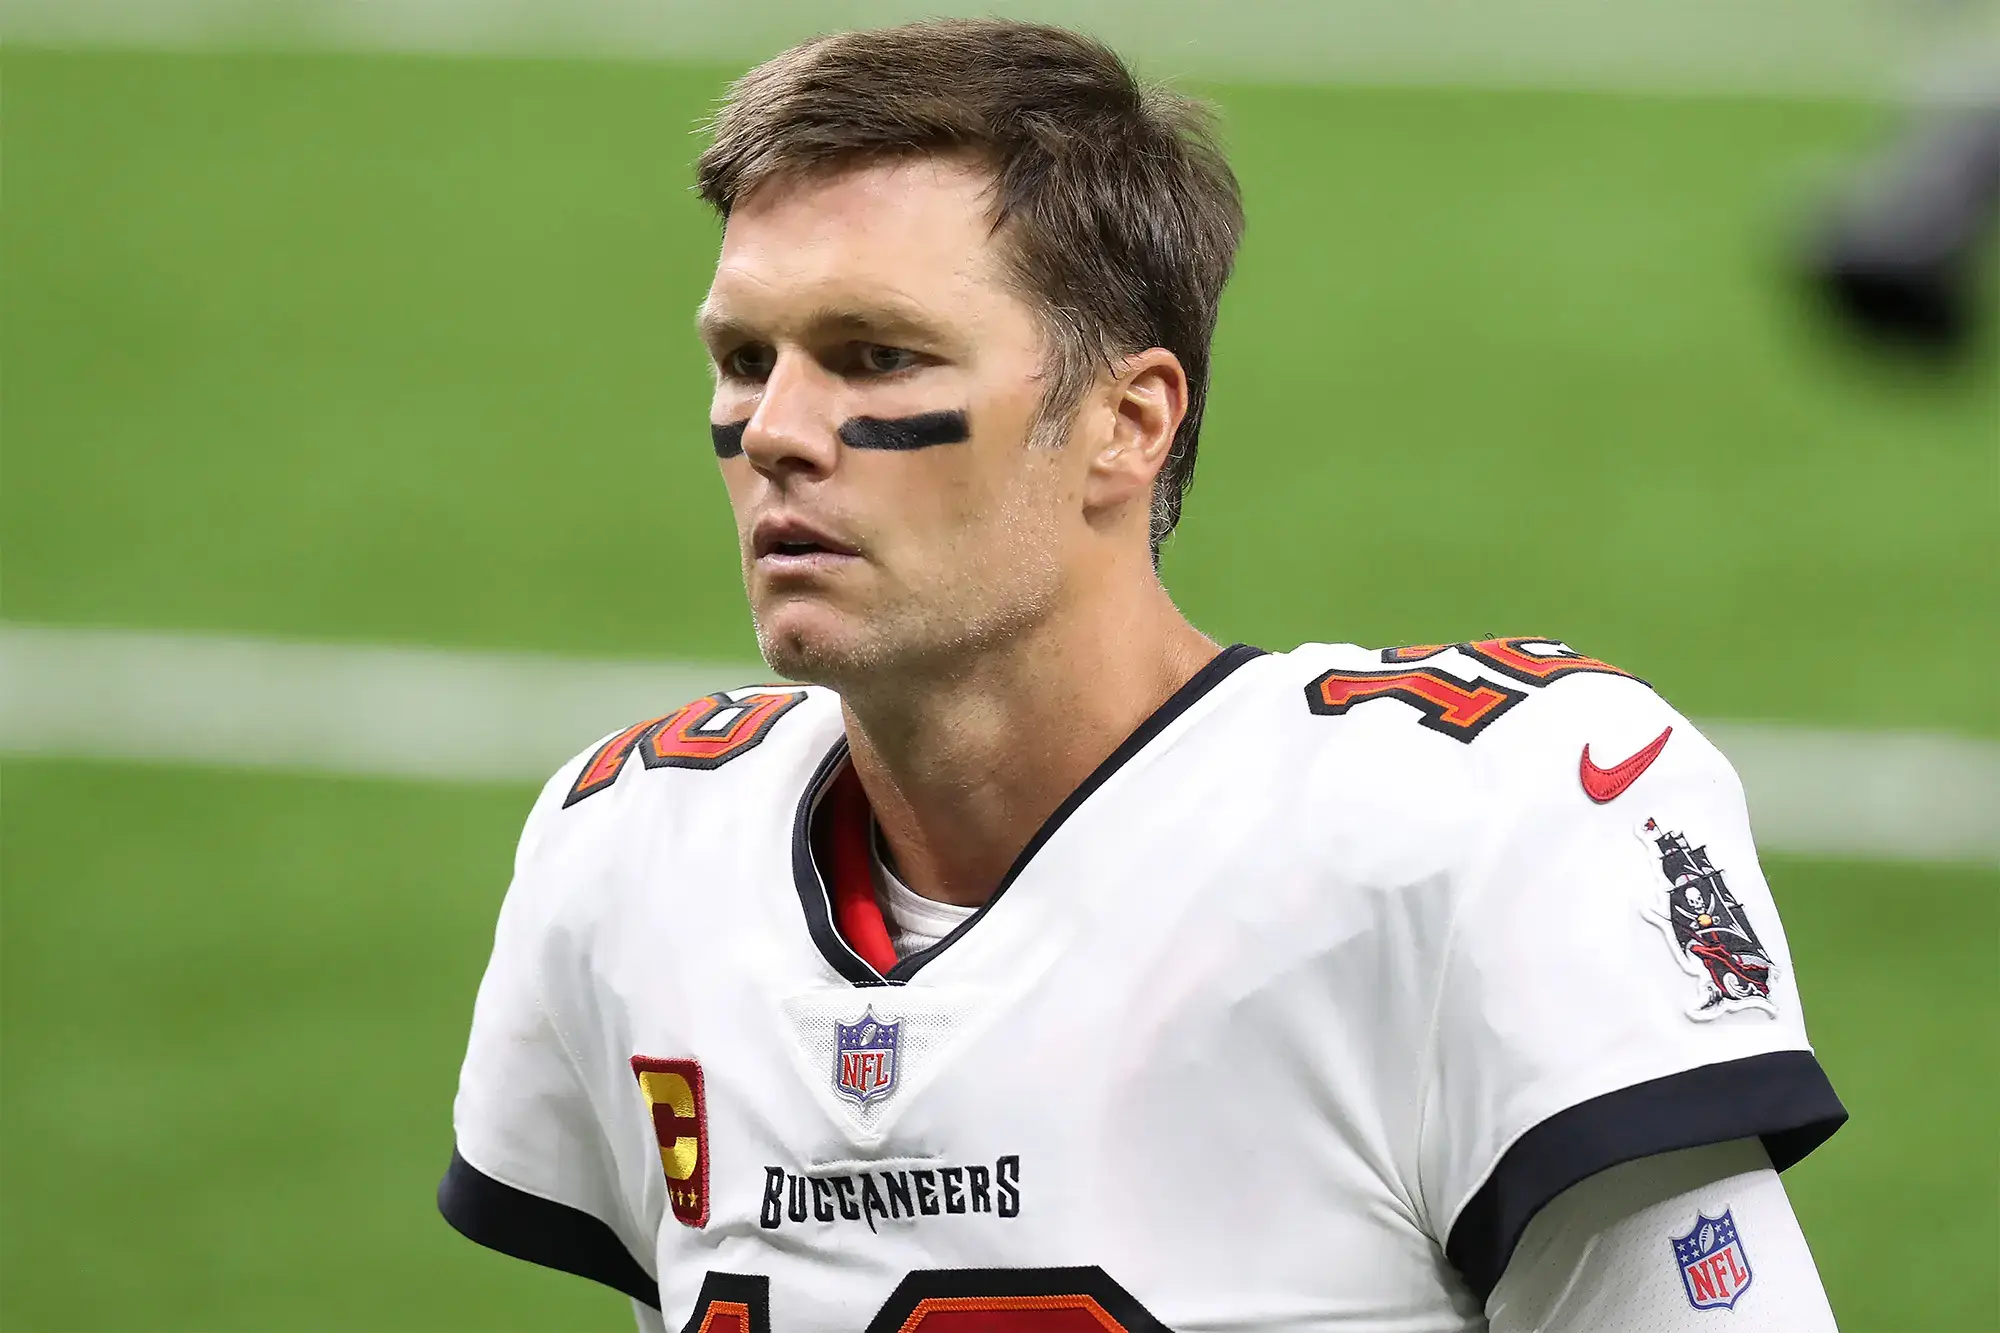 Tom Brady of the Tampa Bay BUccaneers